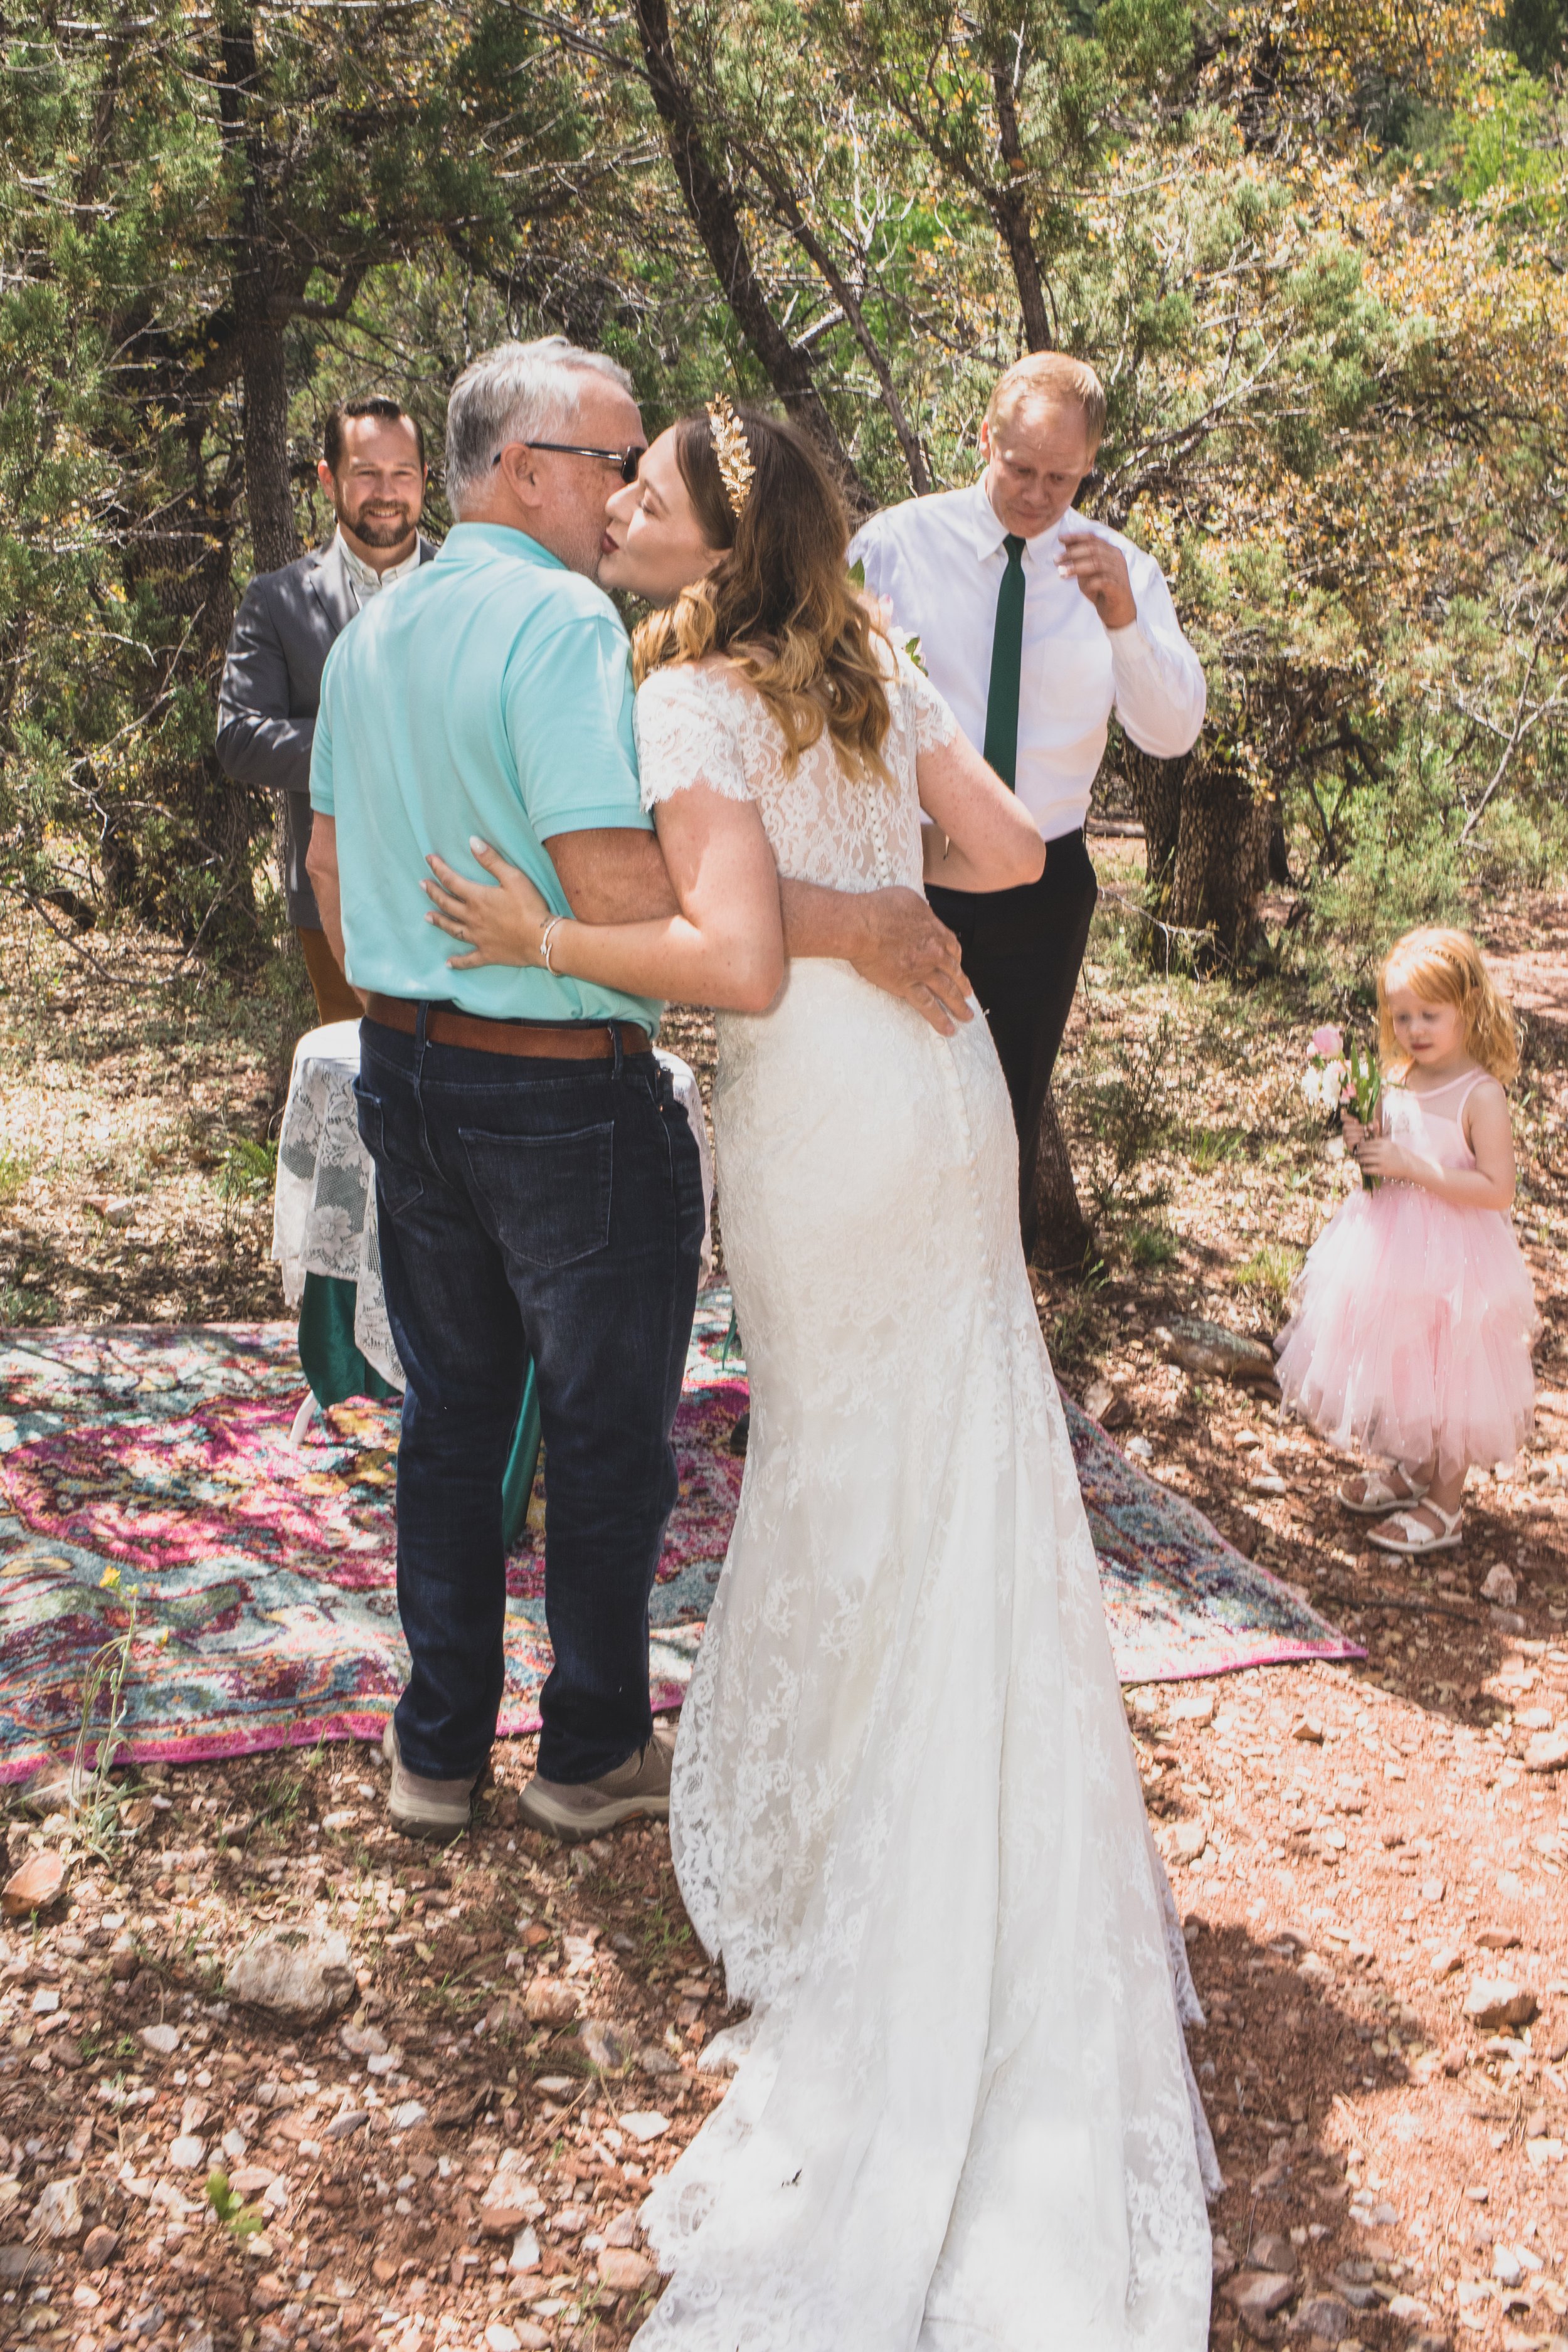 Groom looking at his Bride on their wedding day at their high noon desert elopement in Payson, Arizona by Arizona Elopement Photographer Jennifer Lind Schutsky.